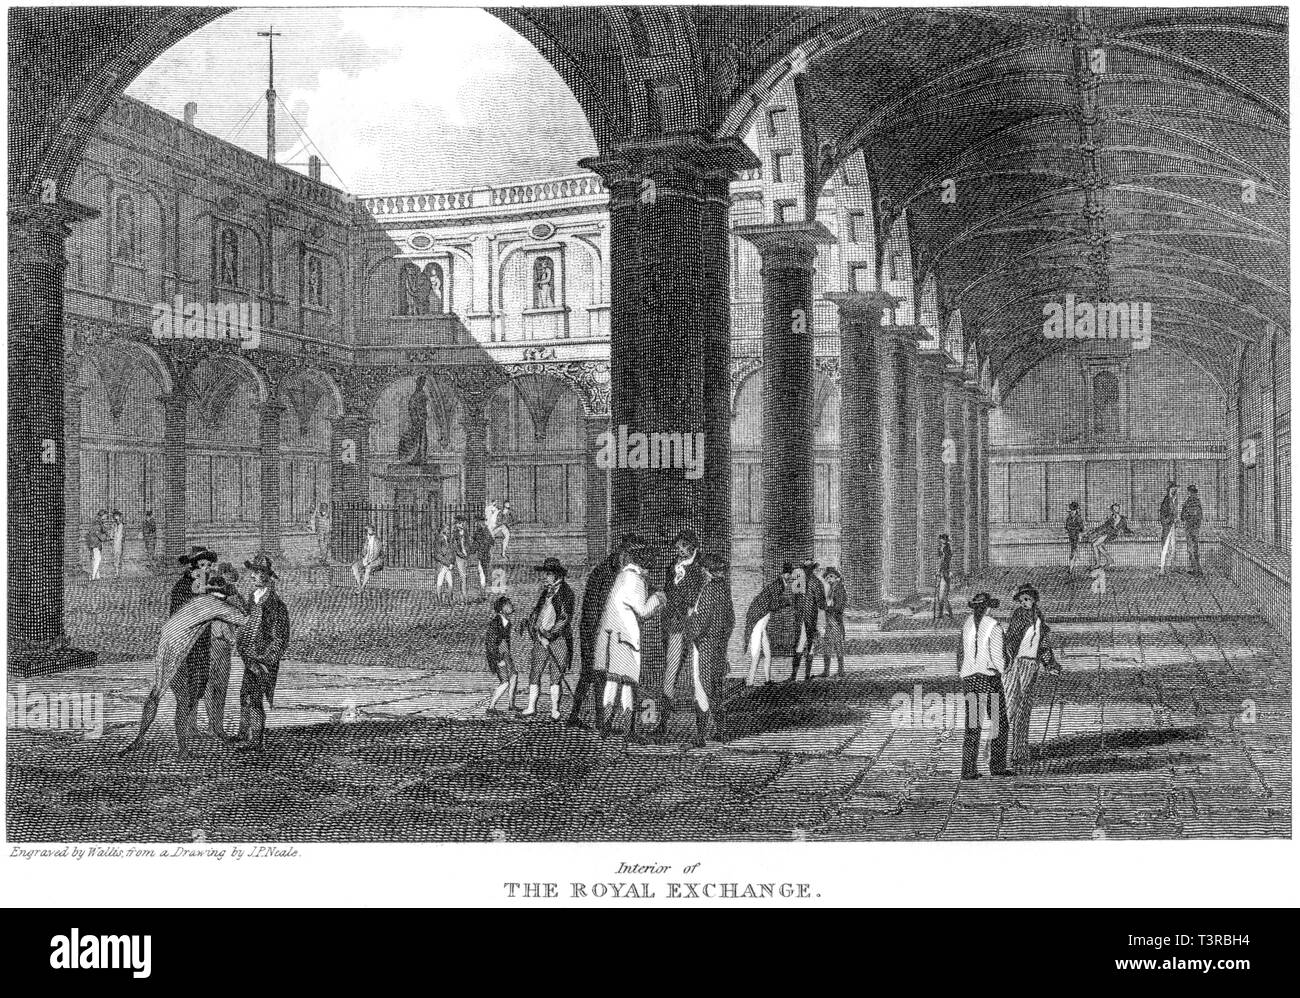 An engraving of the Interior of The Royal Exchange looking southward, London UK scanned at high resolution from a book published in 1814. Stock Photo